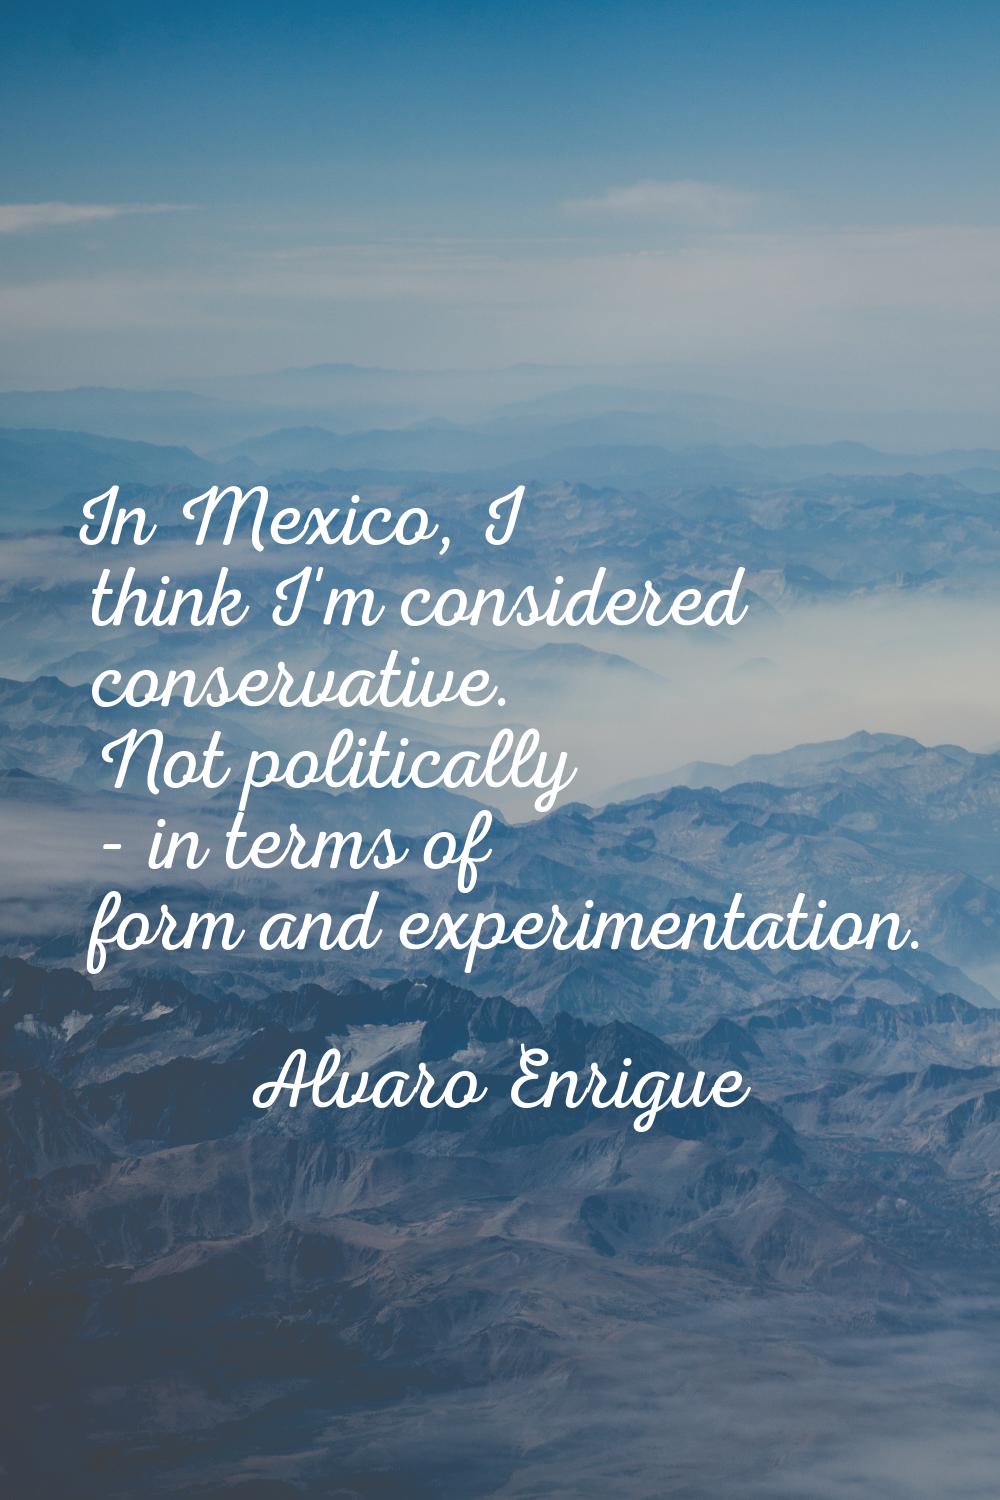 In Mexico, I think I'm considered conservative. Not politically - in terms of form and experimentat